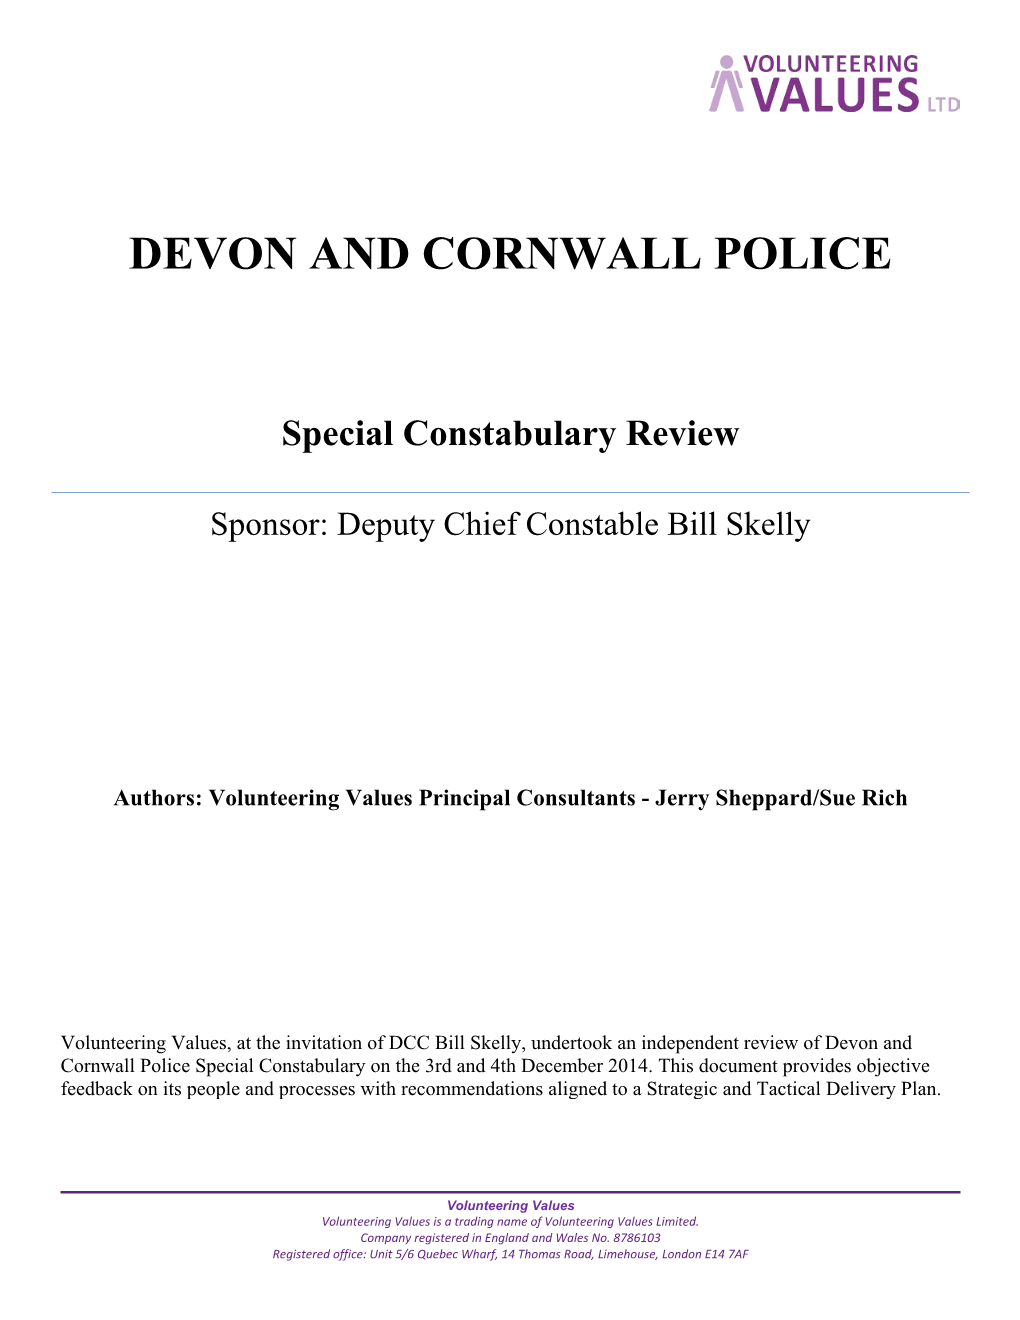 Special Constabulary Review